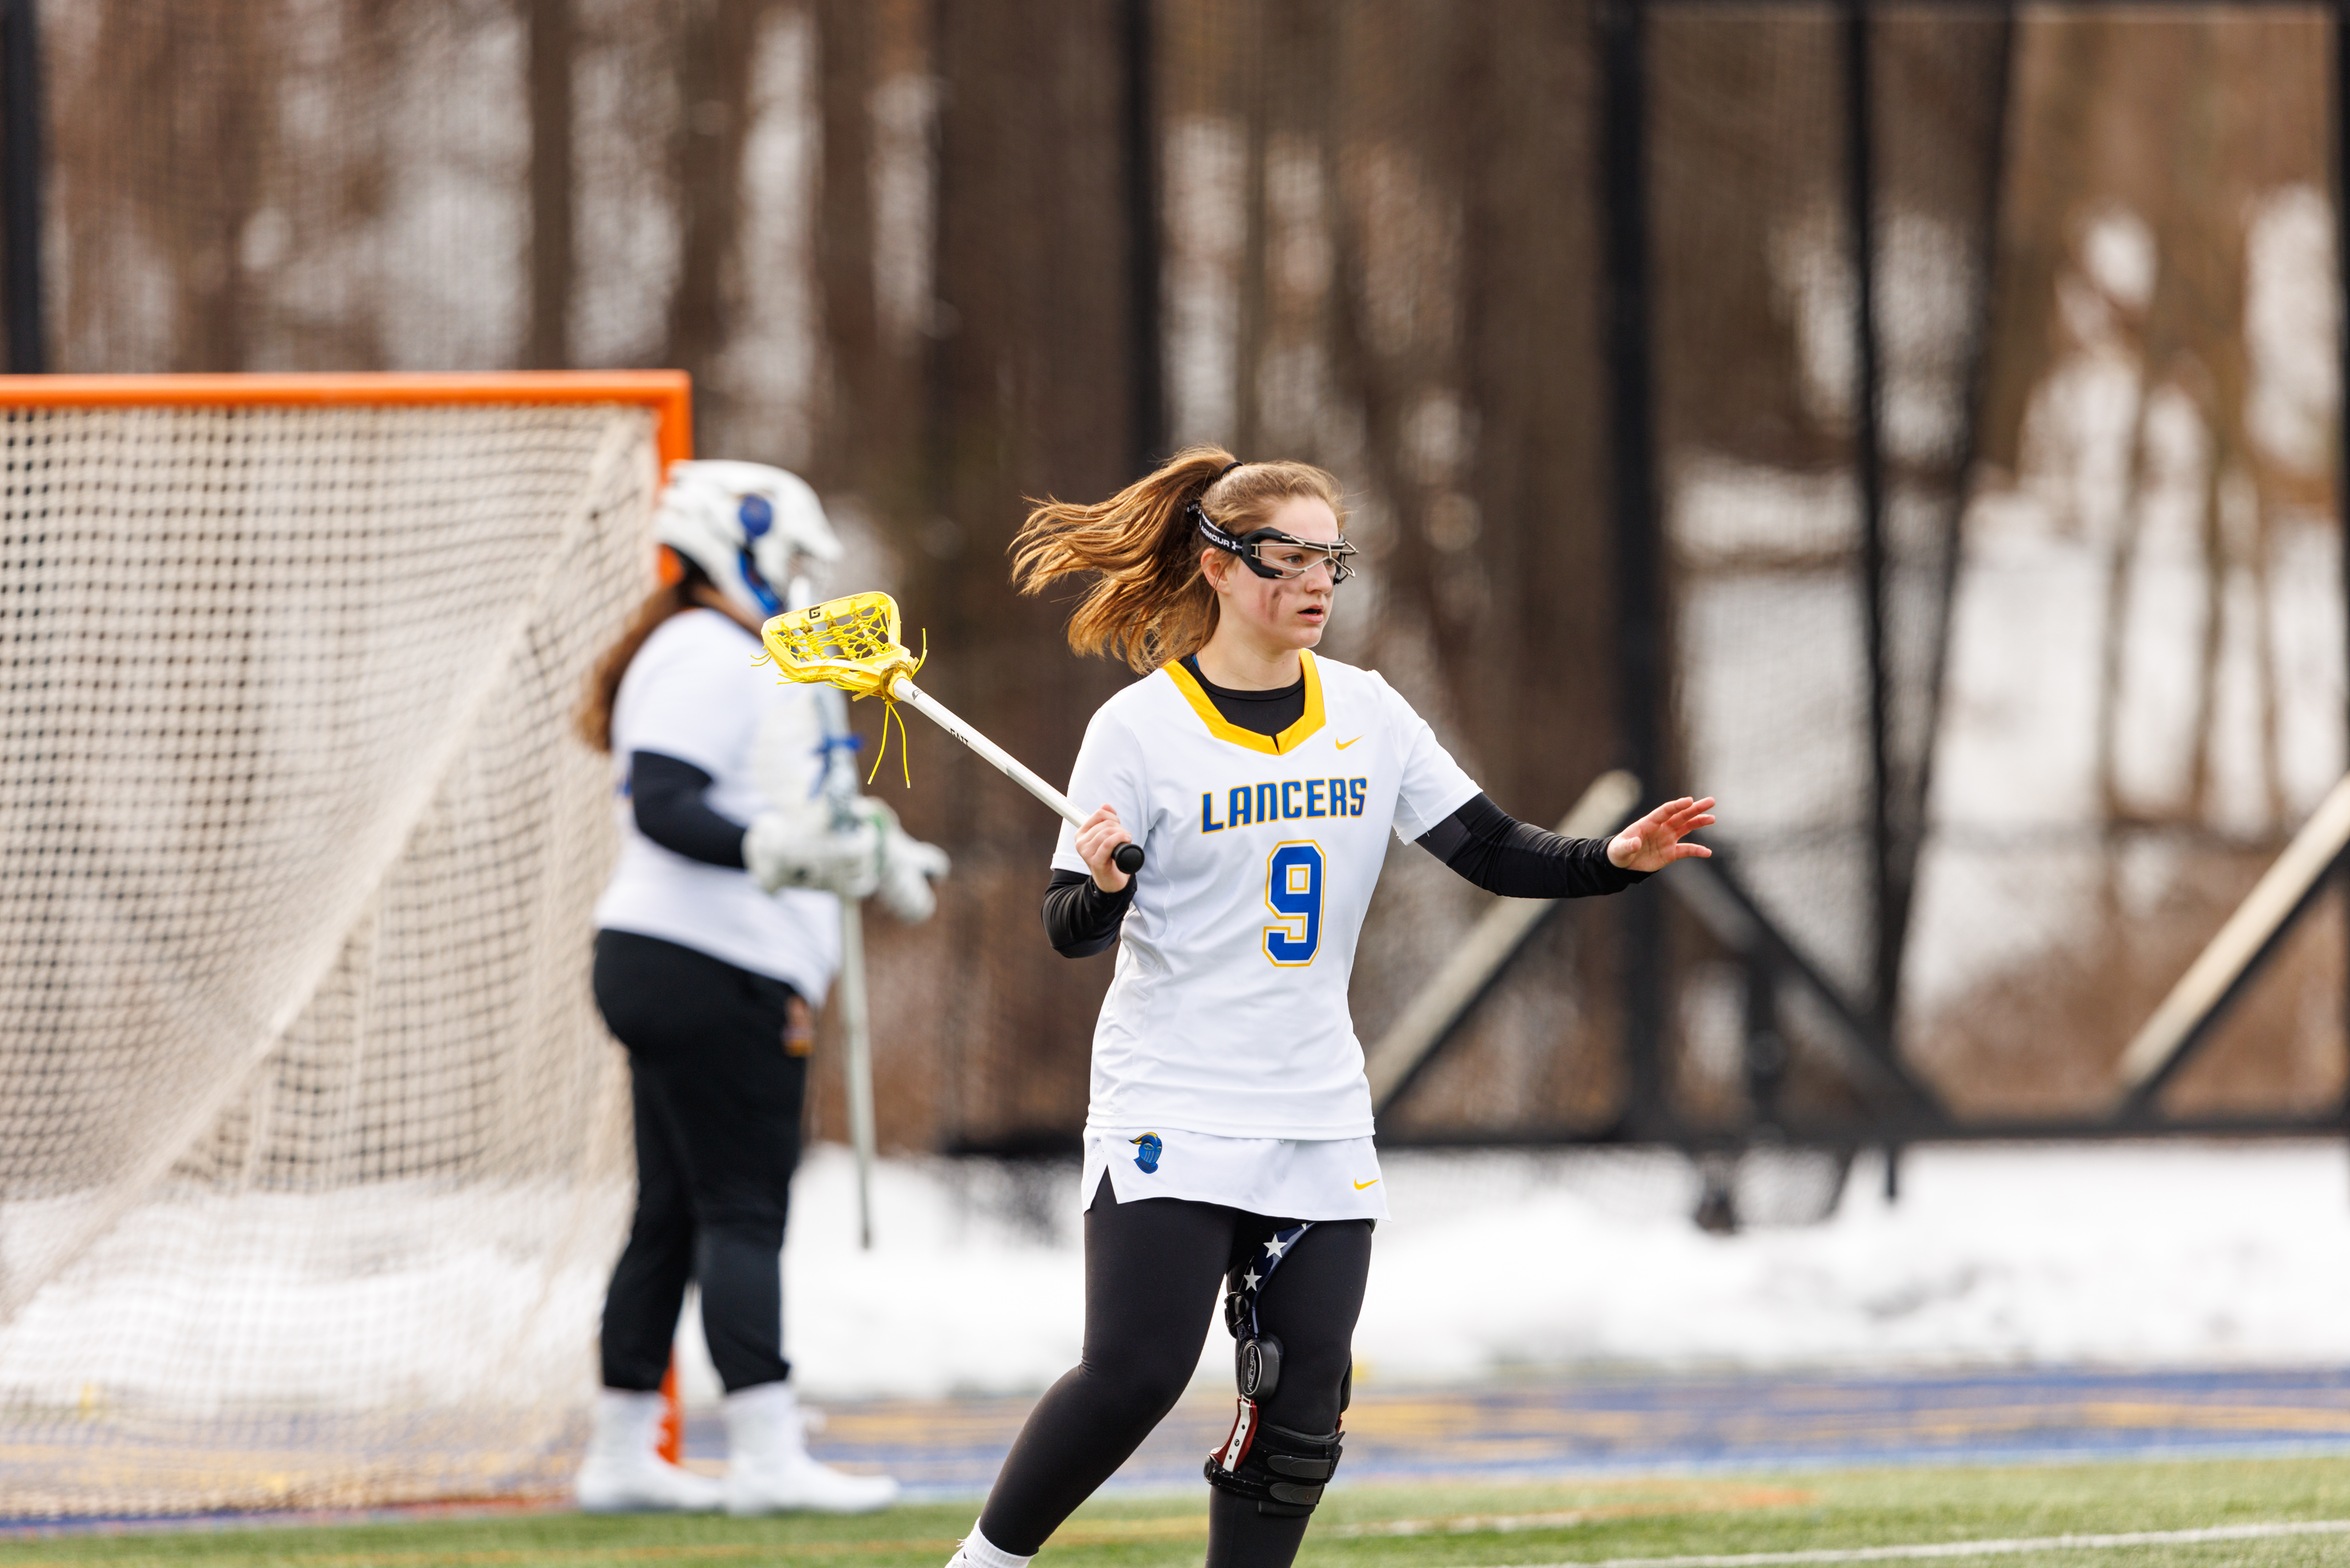 Worcester State Women's Lacrosse Open up Season at Smith College